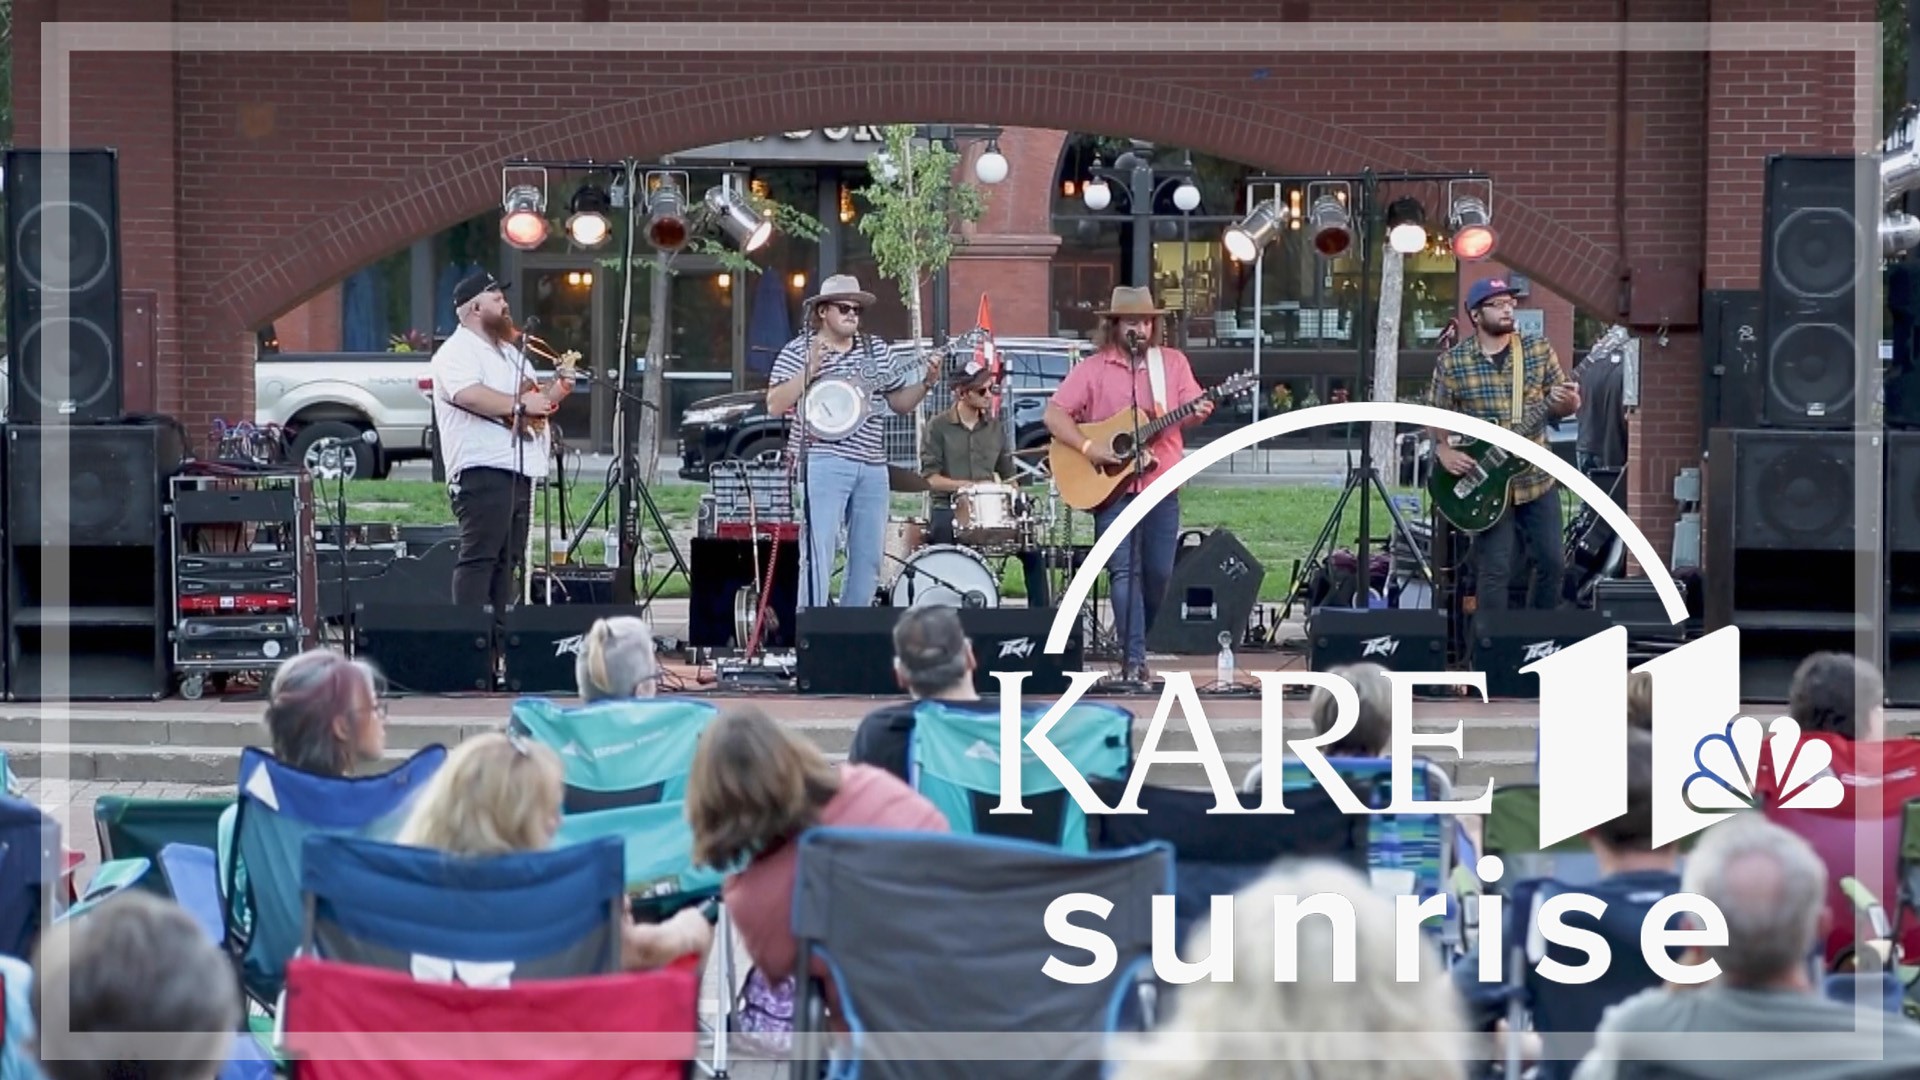 Lowertown Sounds returns to Mears Park on Thursday nights from June through August.